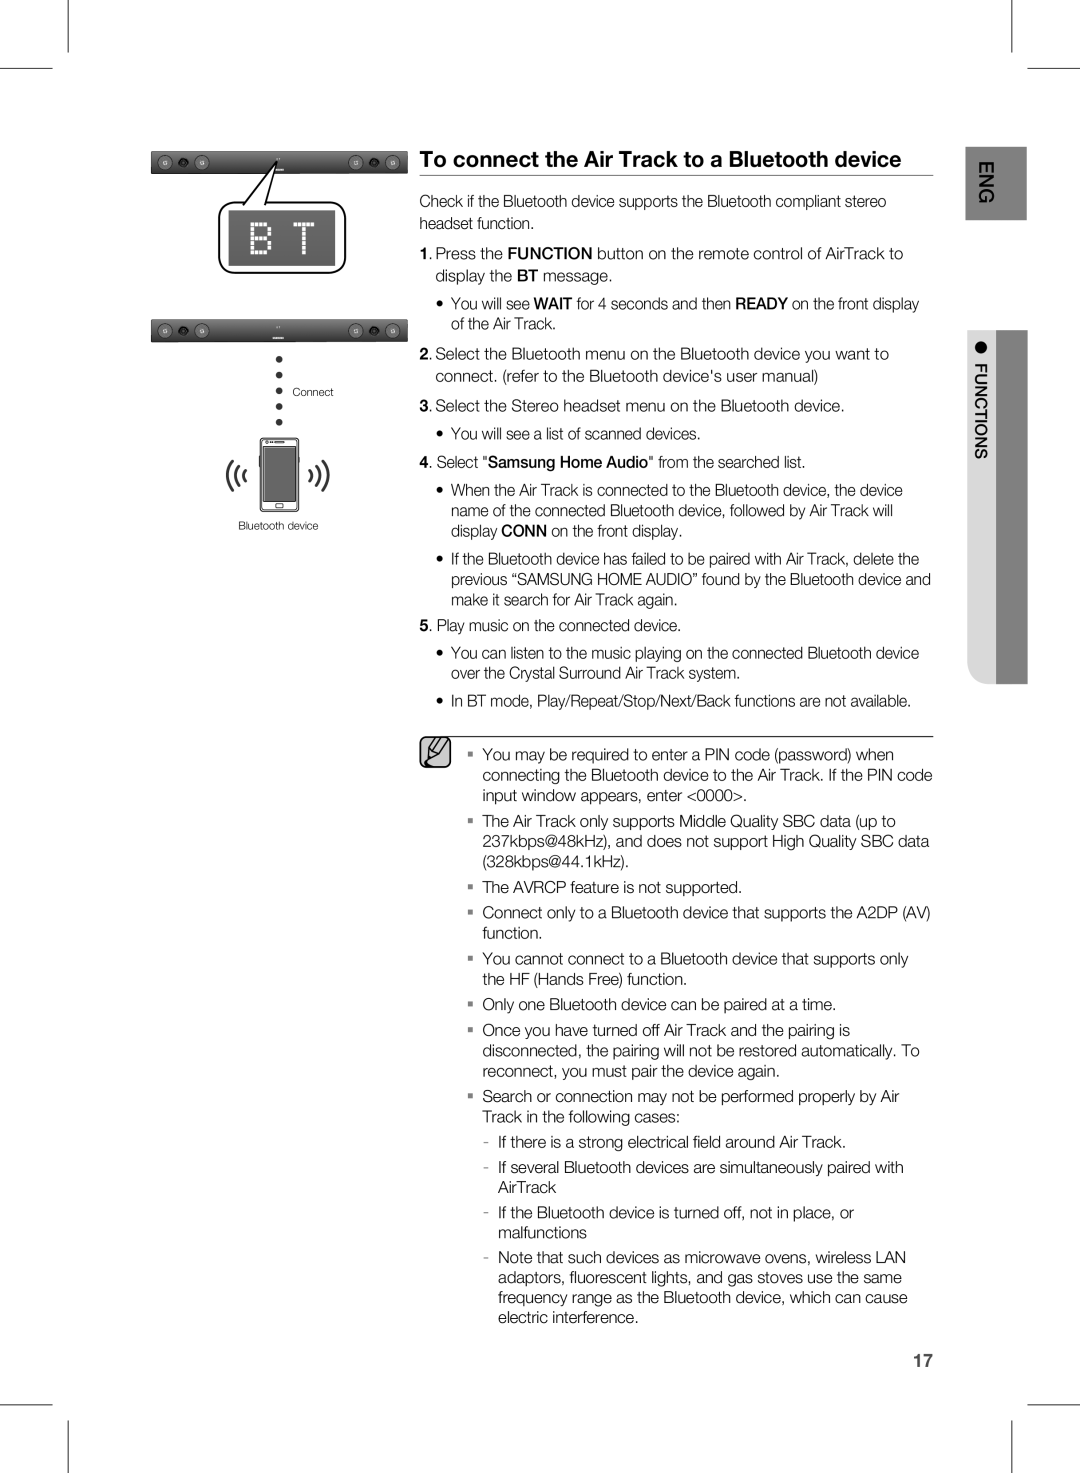 Samsung HW-E450 user manual To connect the Air Track to a Bluetooth device 